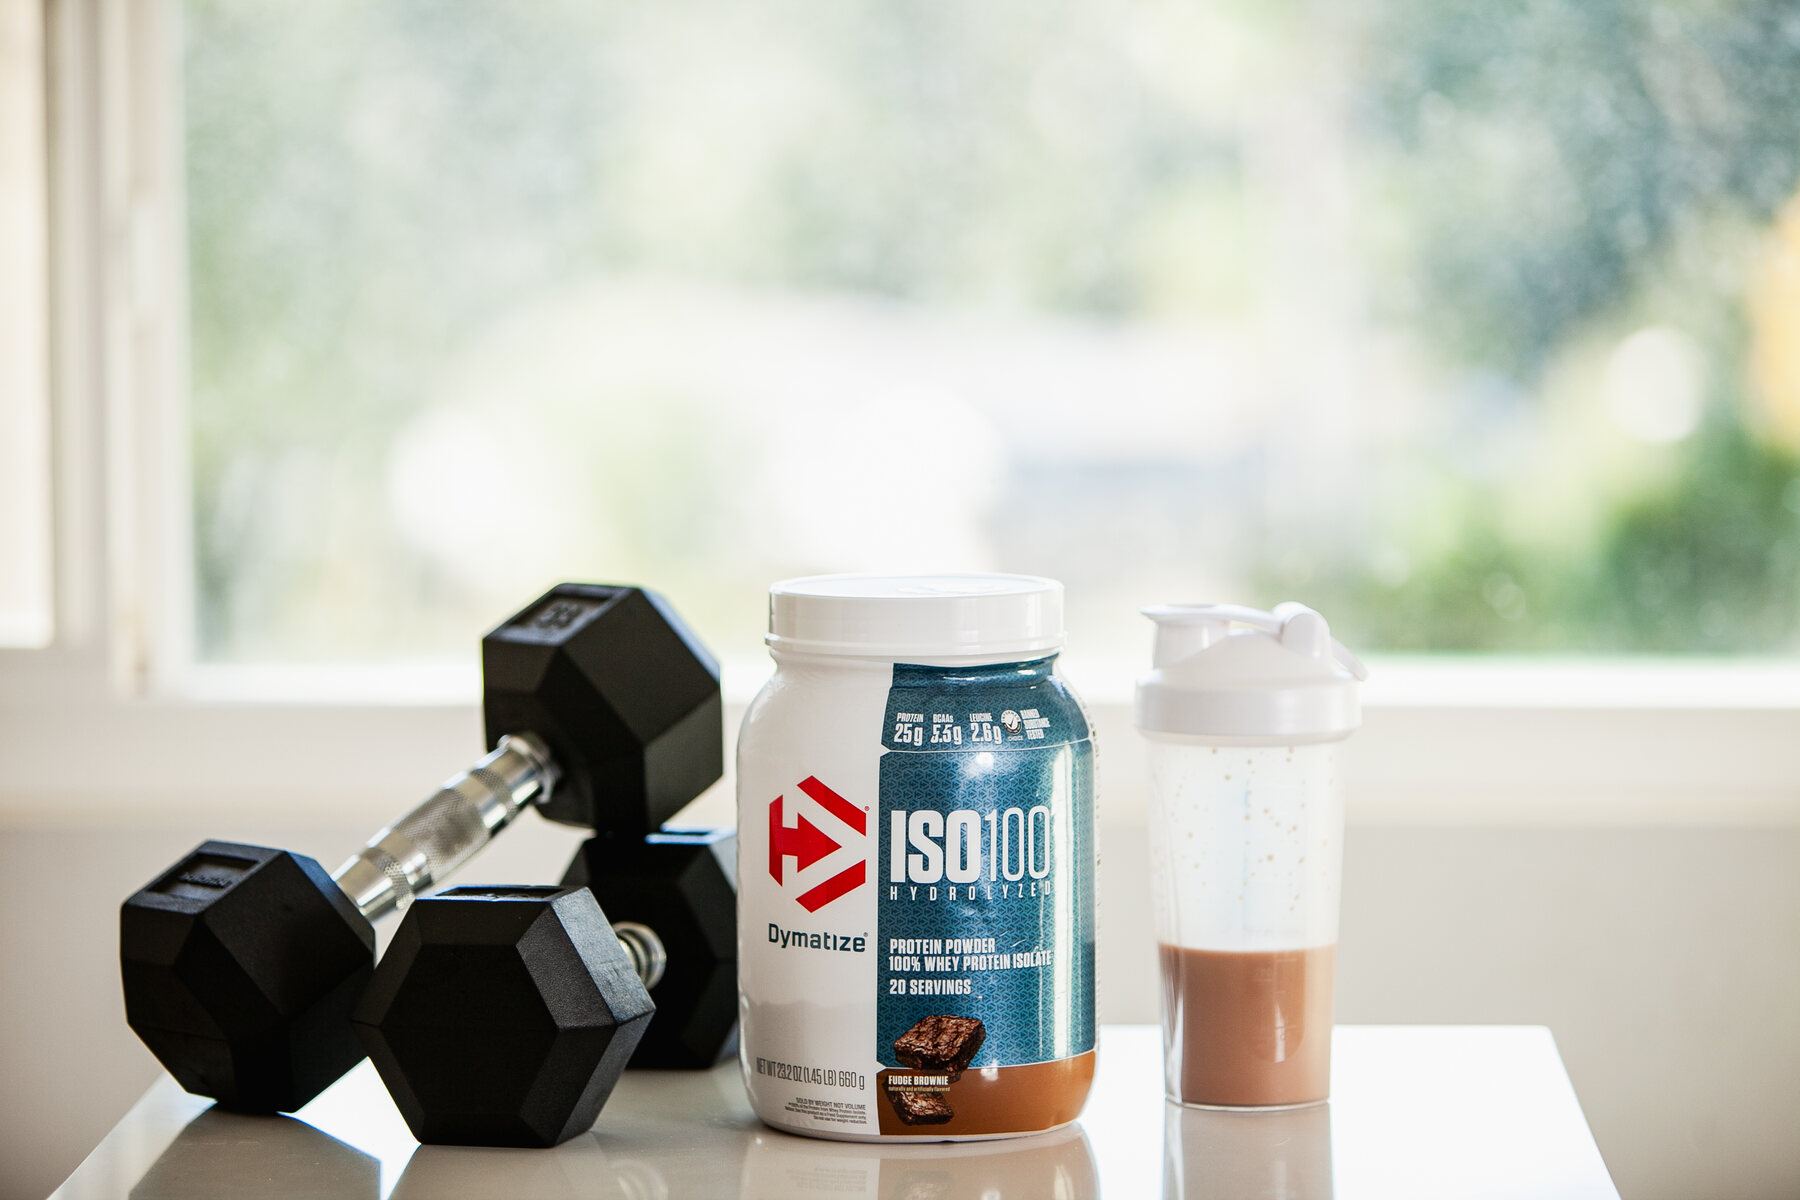 A black dumbbell, a jar of protein powder, and a filled shaker bottle on a white surface with a window in the background